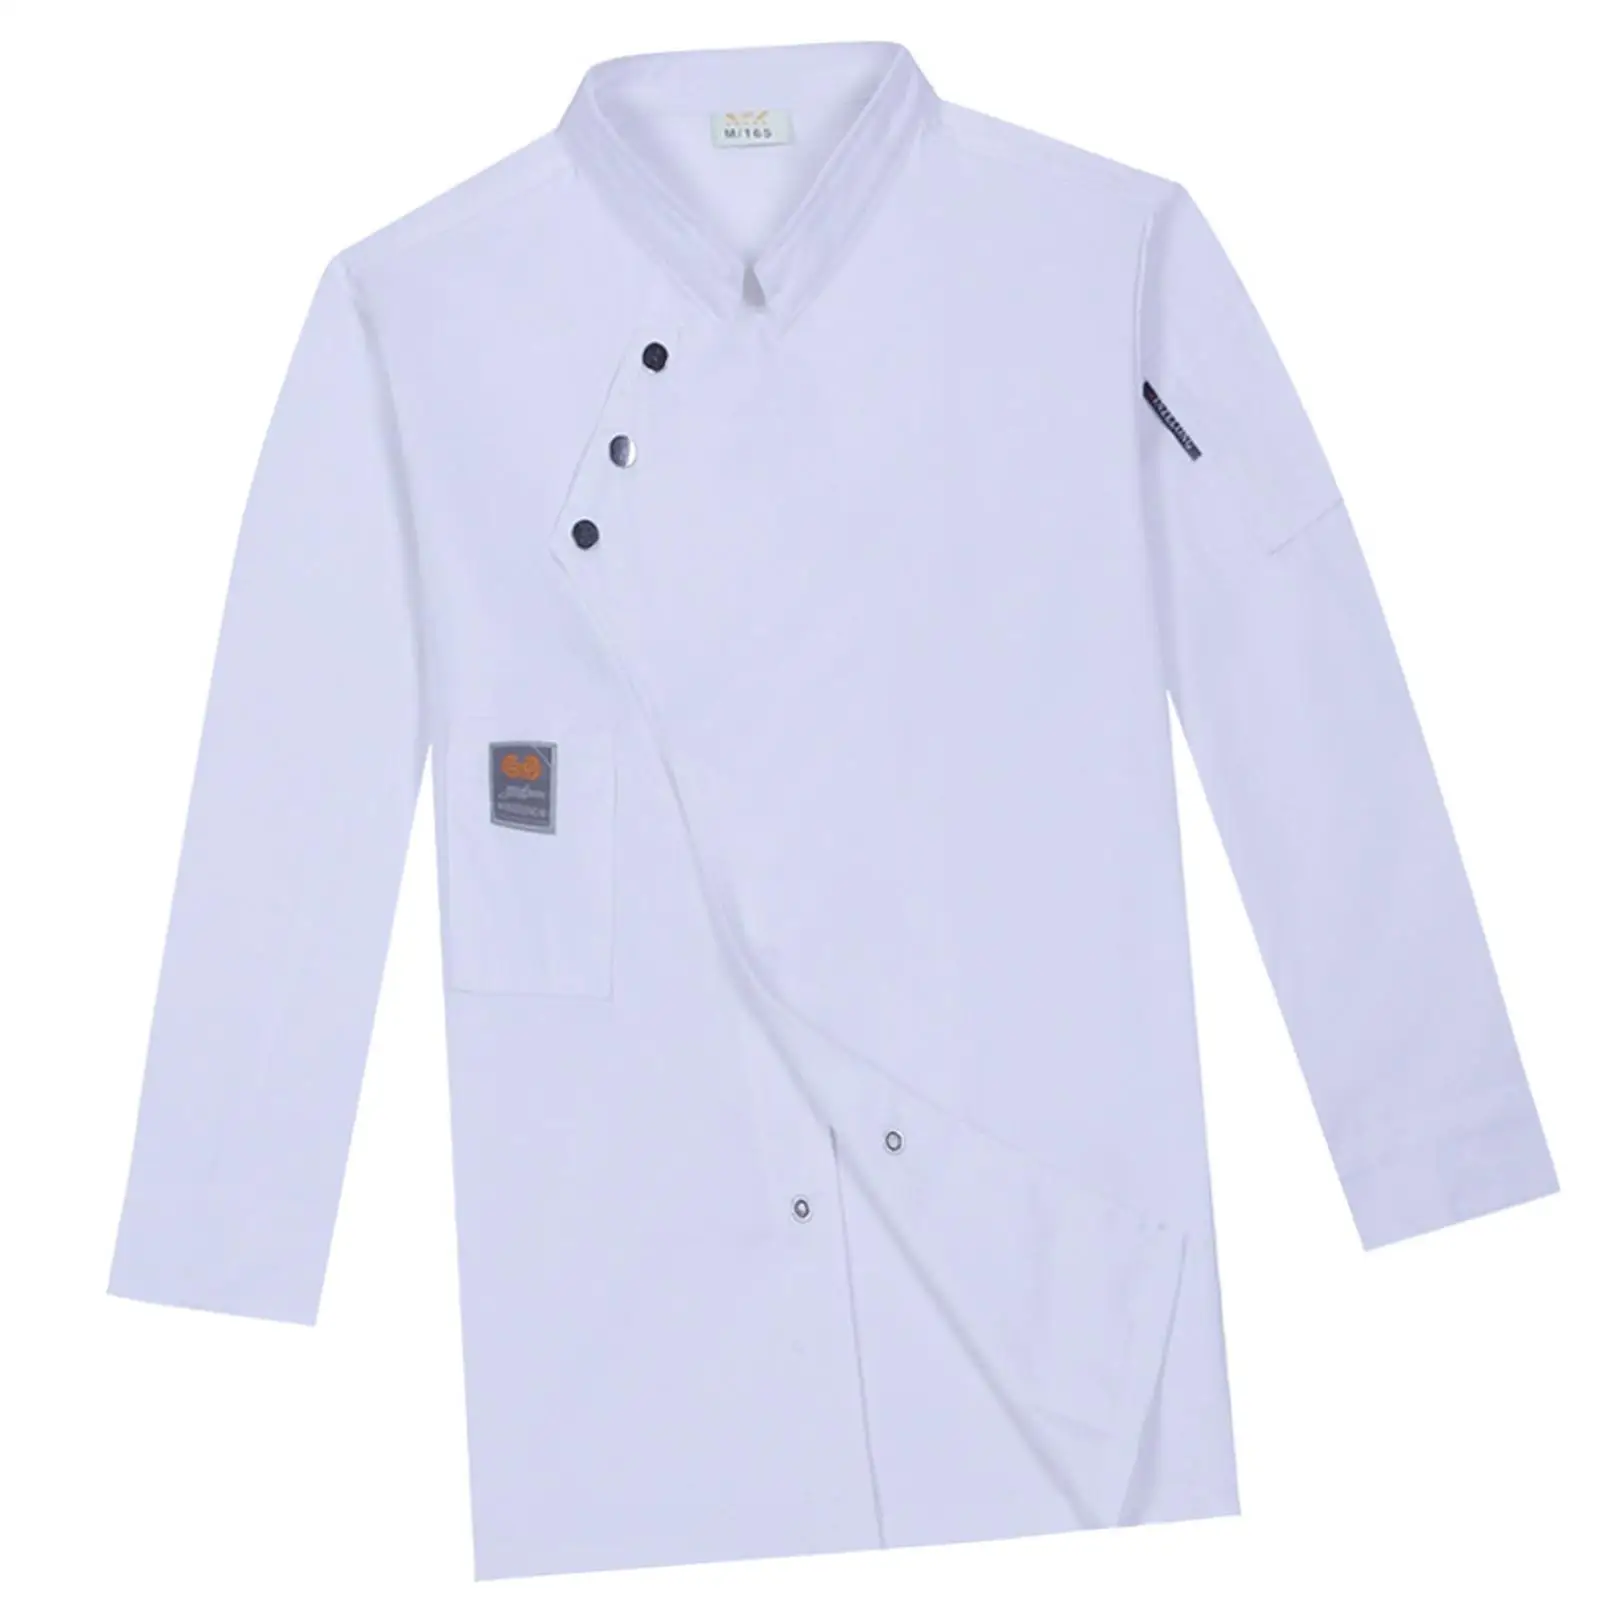 Unisex Chef Coat Chef Wear Classic Waiter Apparel Lightweight Breathable Chef